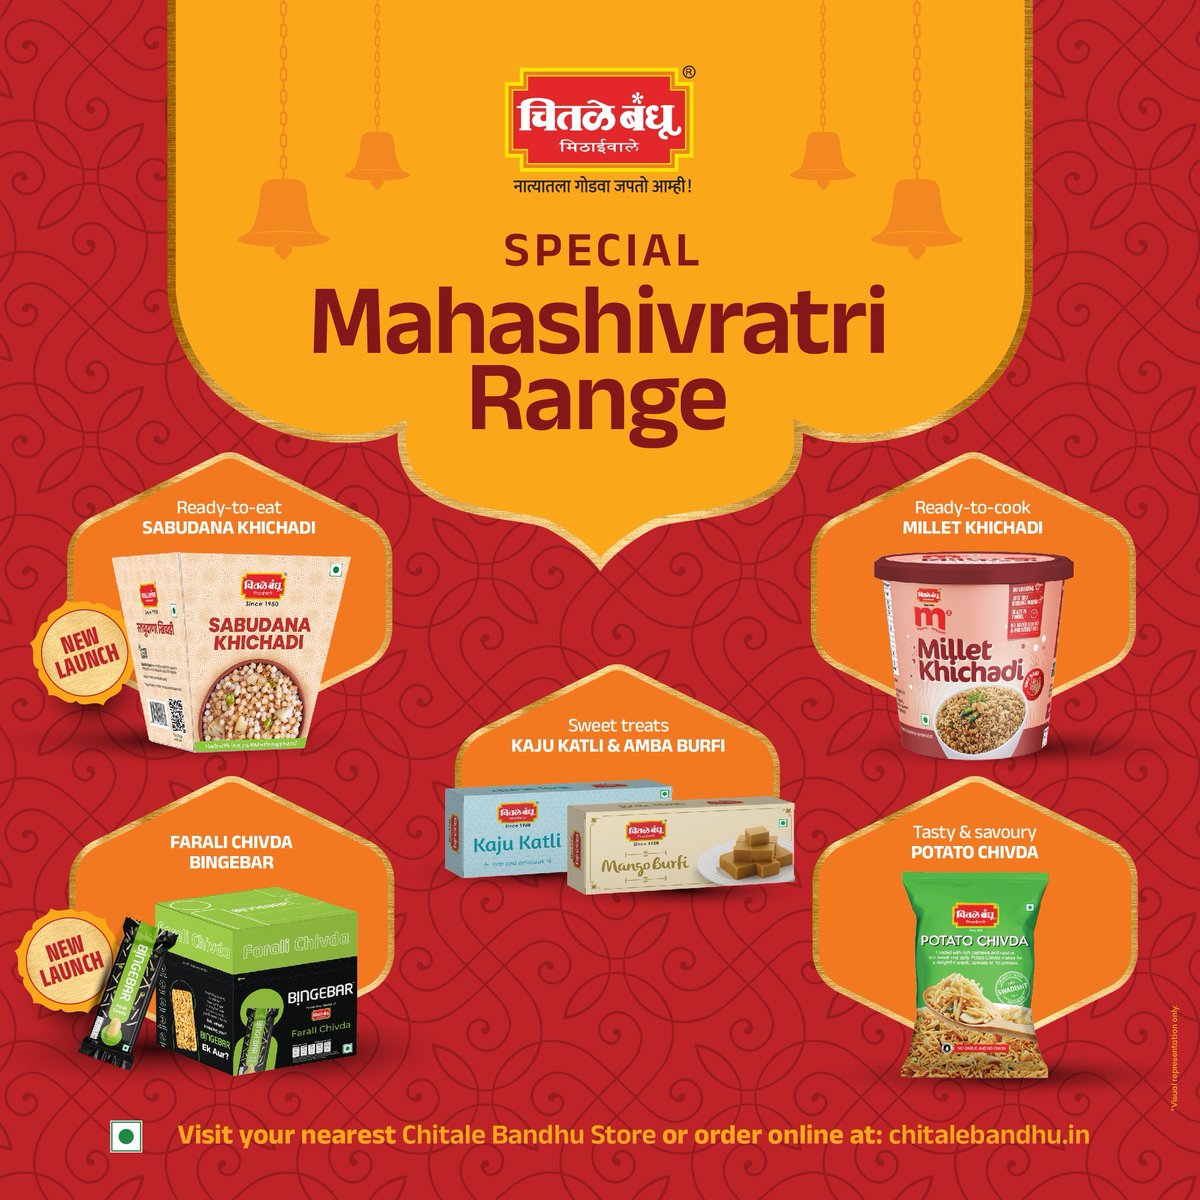 Presenting our Special Mahashivratri Range where you have 6 tasty treats to choose from.❤

From the all-new Sabudana Khichadi and Farali Chivda Bingebar to a upwas friendly Millet Khichadi, enjoy wholesome snacking on-the-go! ✨

What’s more; you can also treat yourself to our